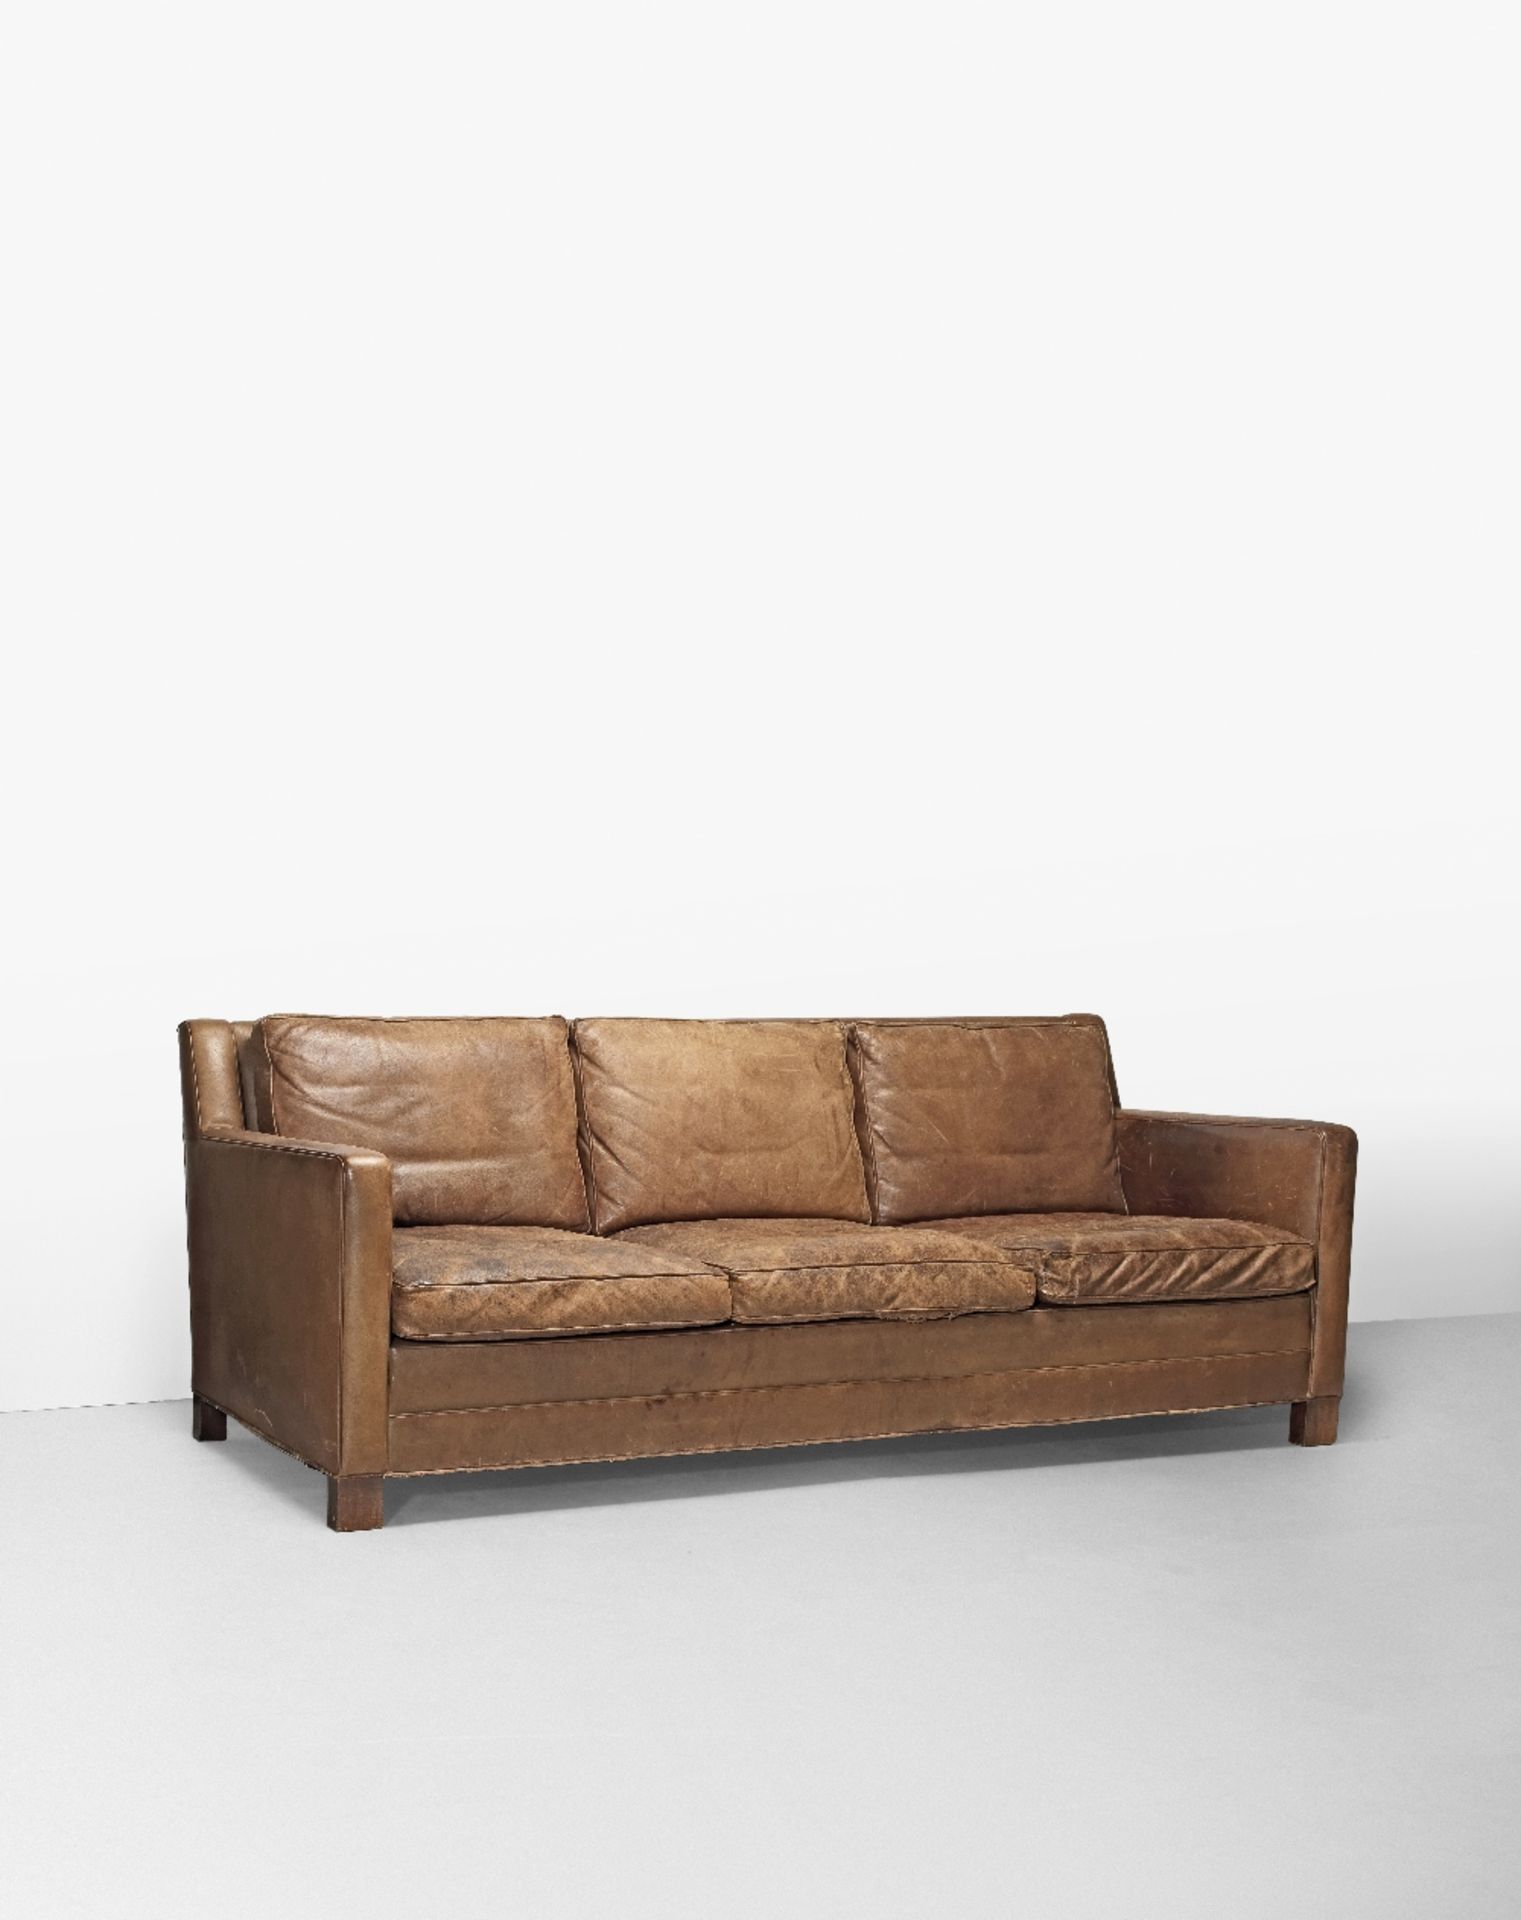 A.J. Iversen Early and rare sofa, designed 1935